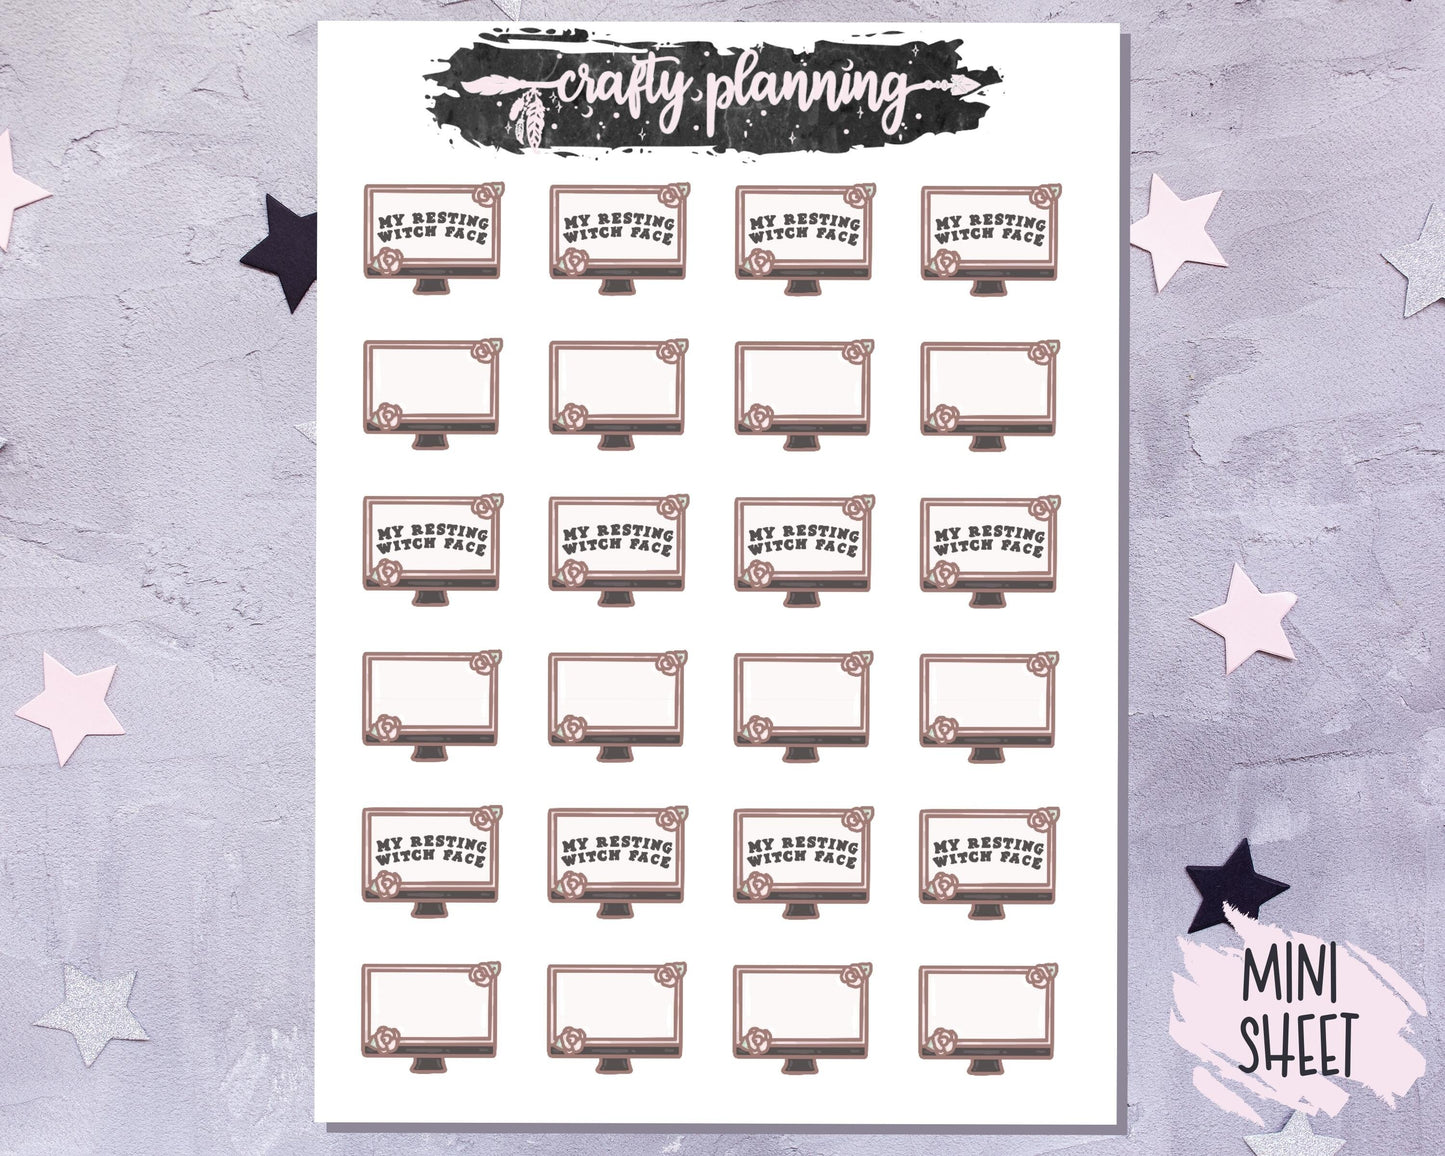 TV Stickers, Screen Stickers, Witchcraft Stickers, Planner Stickers, Gothic Stickers, Doodle Icons, Witchy Stickers